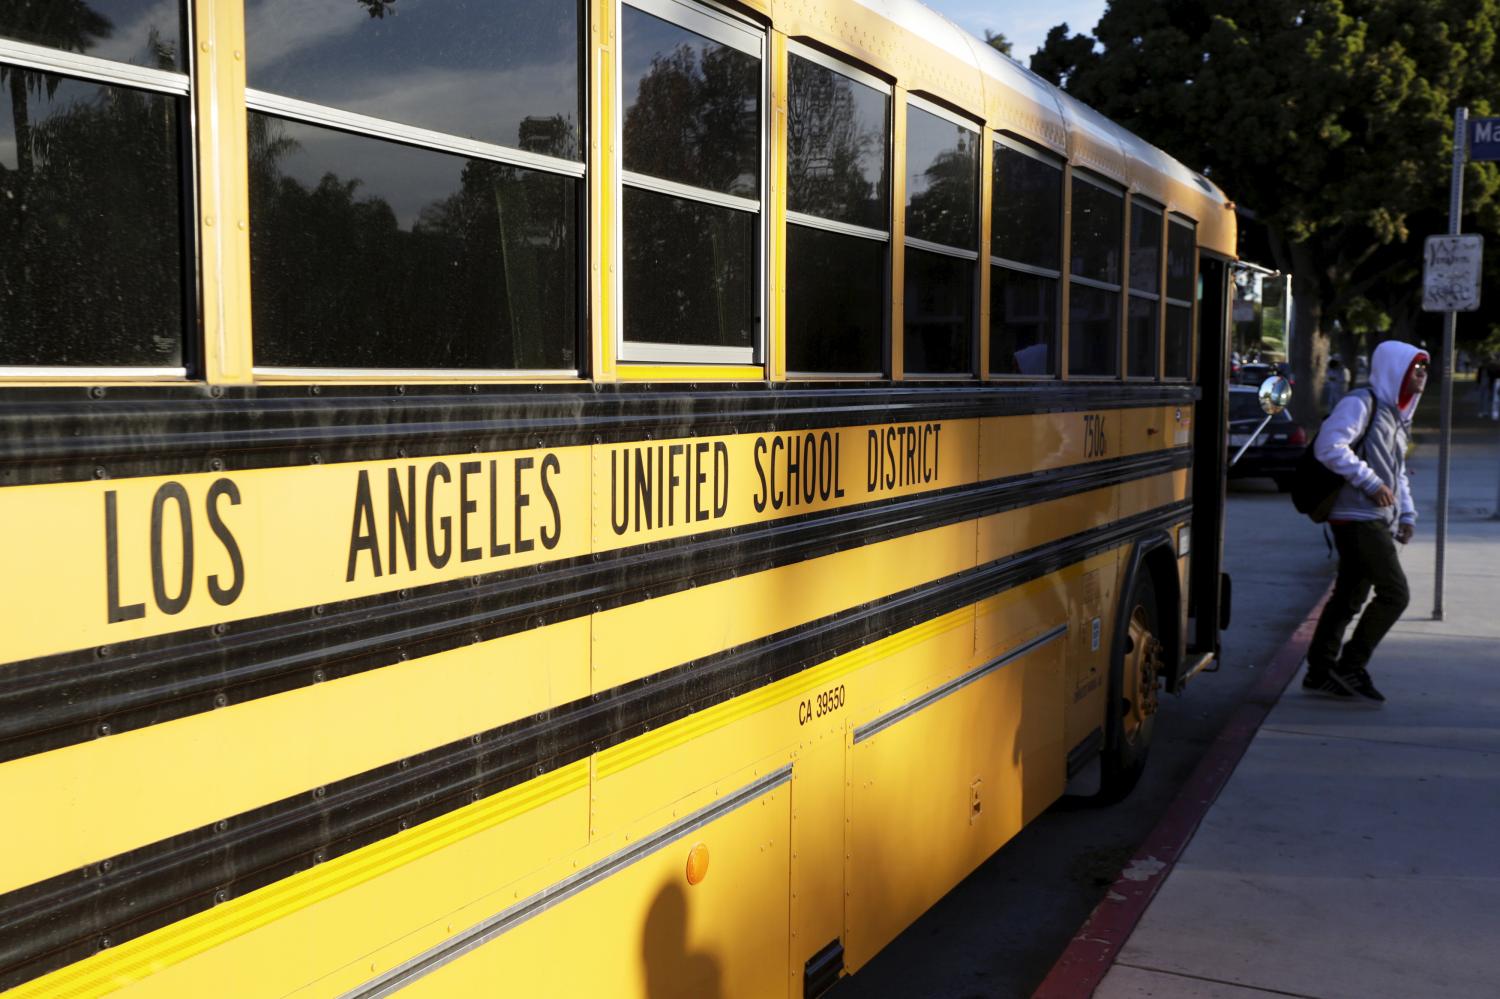 A student exits a bus as he arrives at Venice High School in Los Angeles, California December 16, 2015. Classes resume today in Los Angeles, the second largest school district in the United States,  after they were closed on Tuesday after officials reported receiving an unspecified threat to the district and ordered a search of all schools in the city. REUTERS/Jonathan Alcorn - GF10000267926